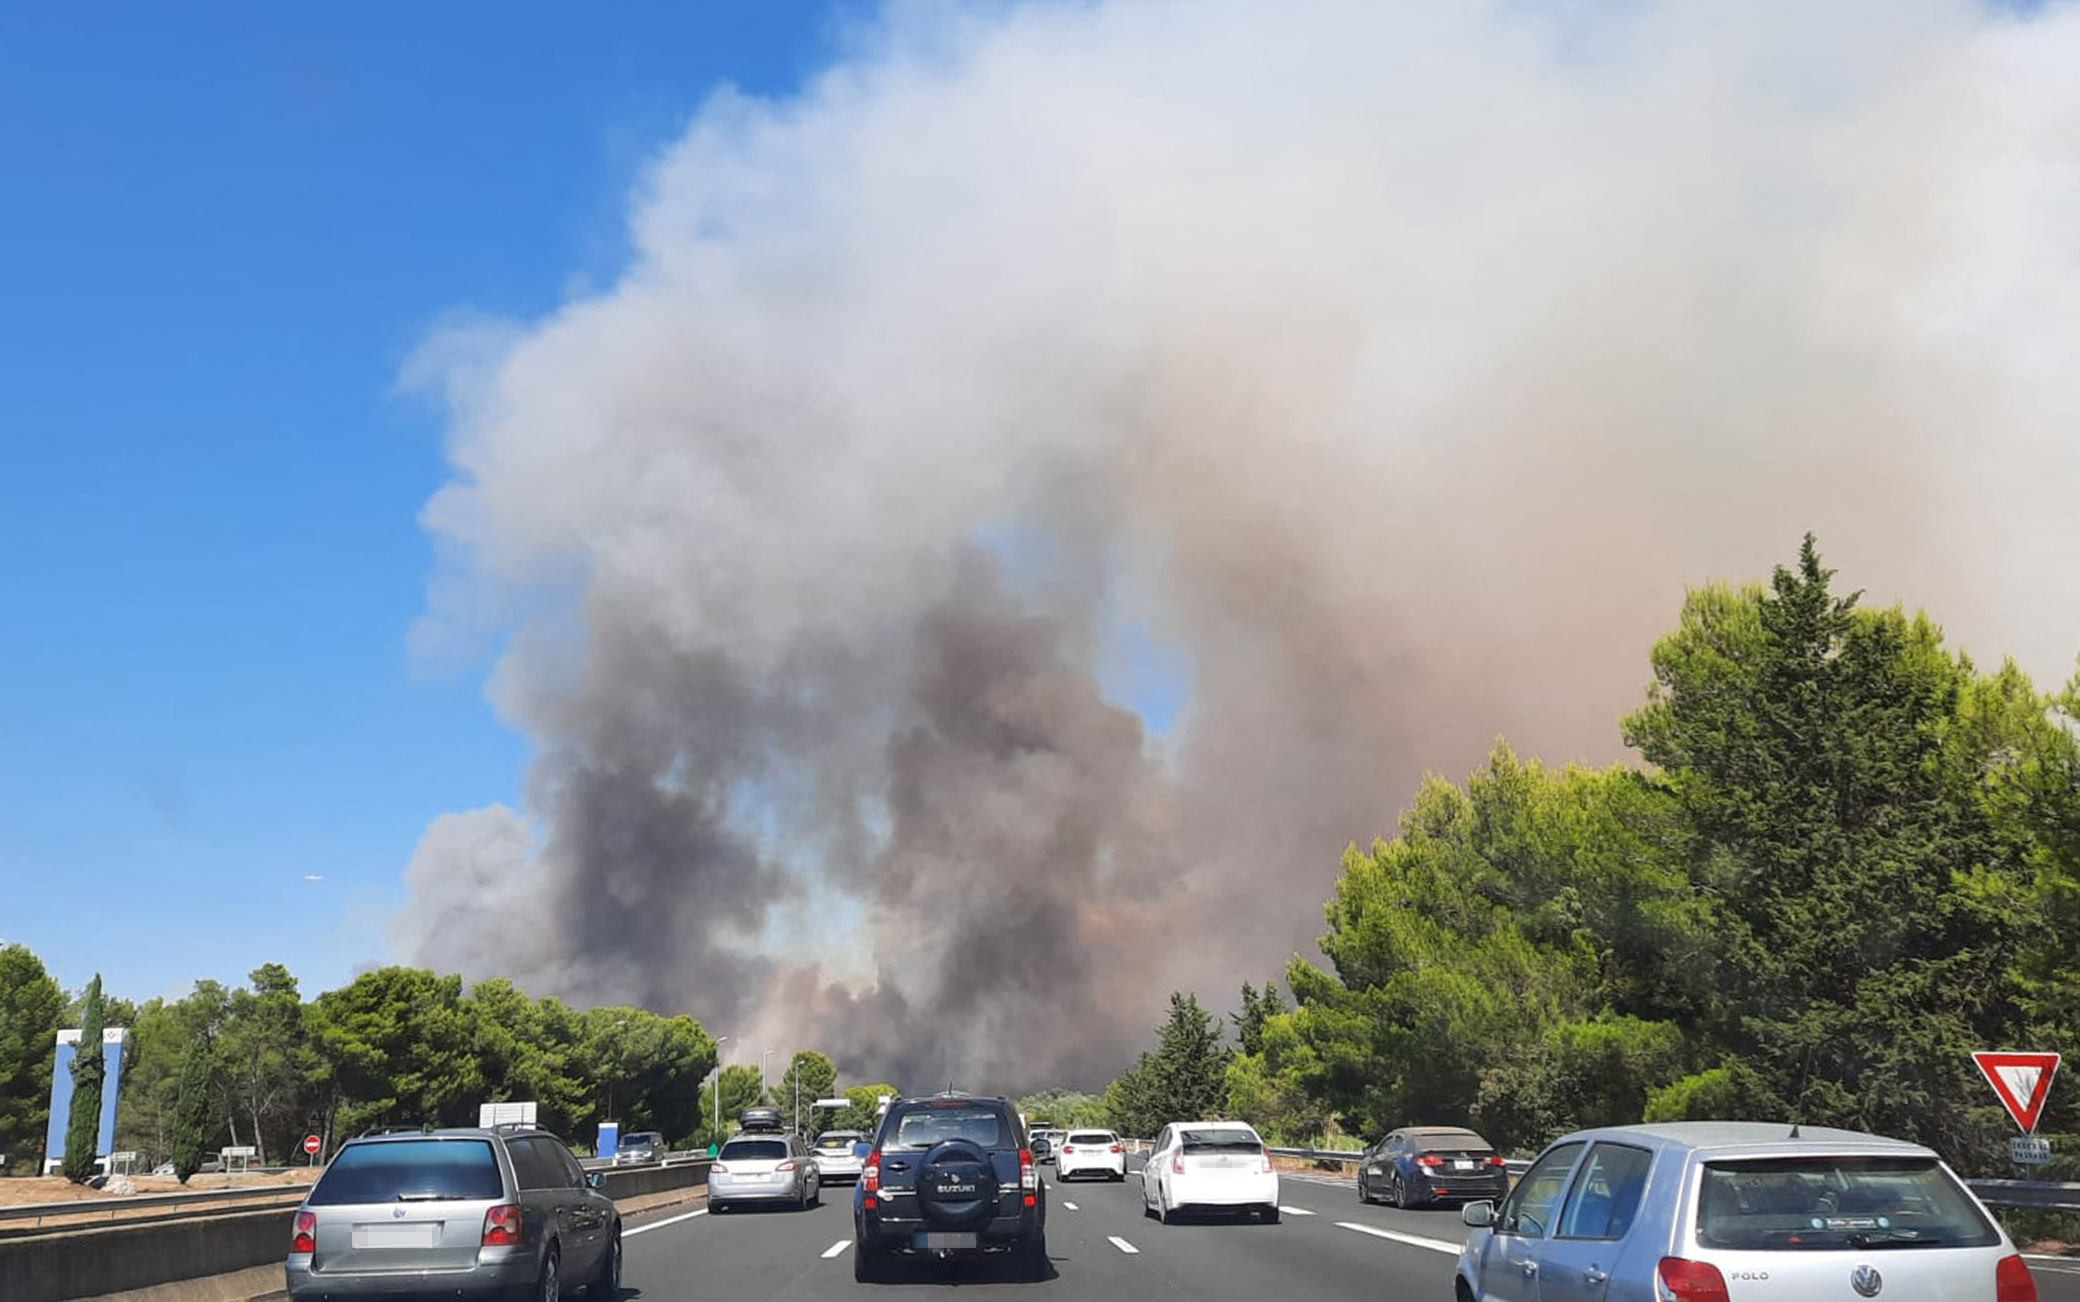 This image taken from a car window along a highway on July 31, 2022, shows thick white smoke from a fire near Aubais, southern France. - According to the French Interior Minister, the fire has taken out 200 hectares and injured four firefighters. (Photo by Benjamin GALY / AFP) (Photo by BENJAMIN GALY/AFP via Getty Images)